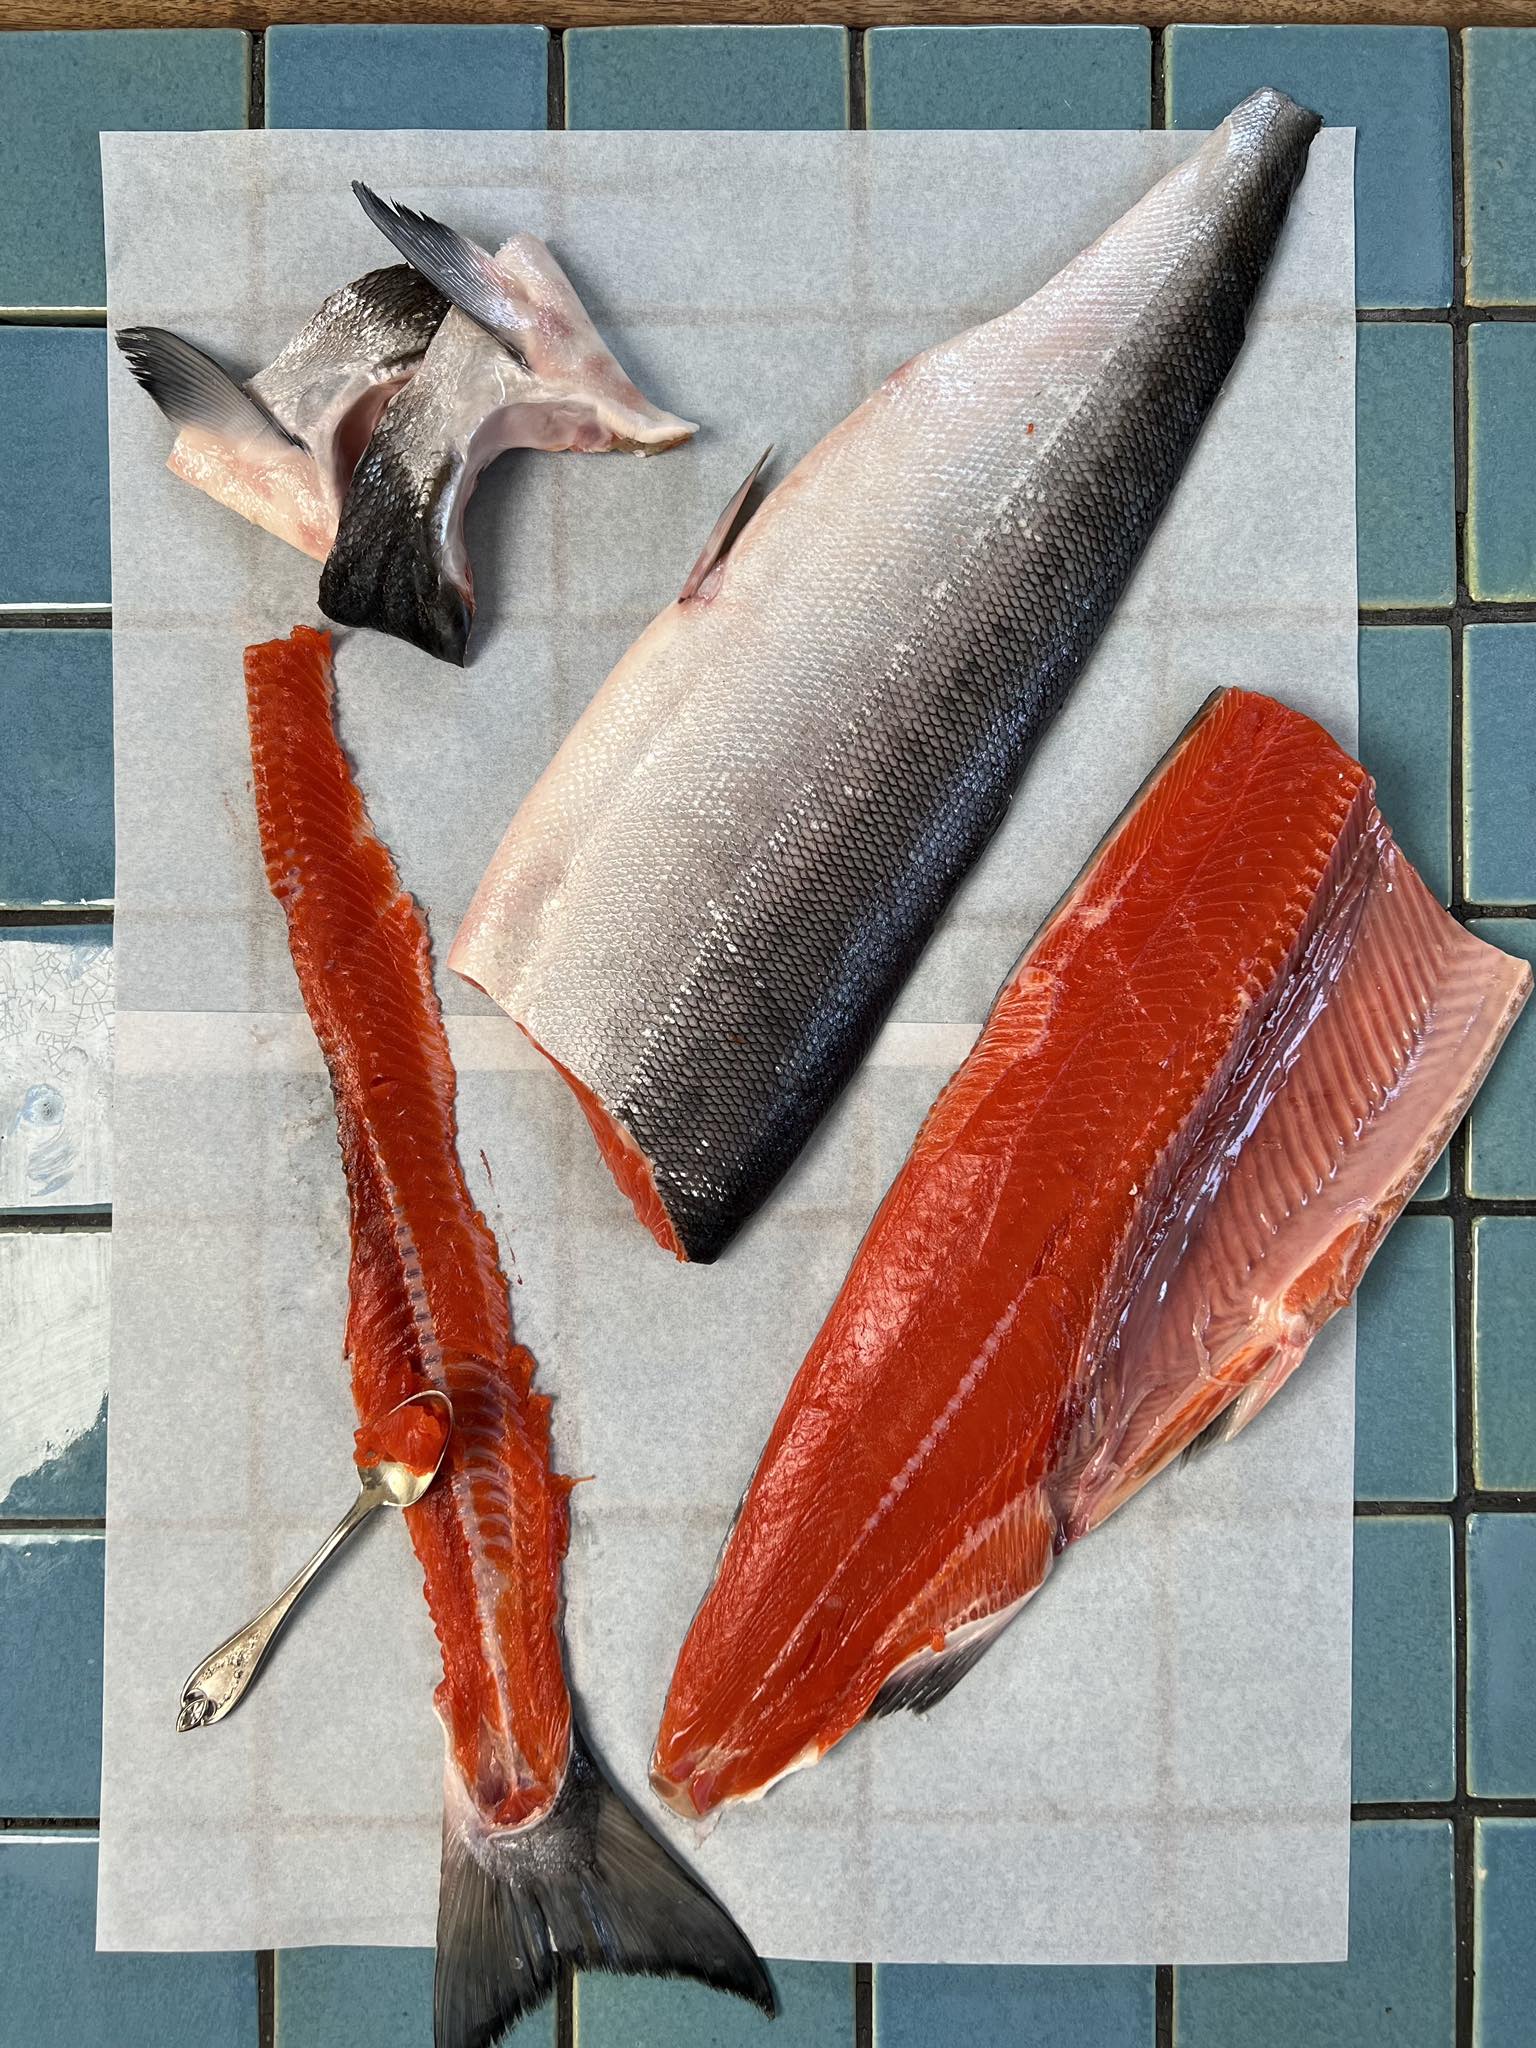 Salmon held up on counter for preparation